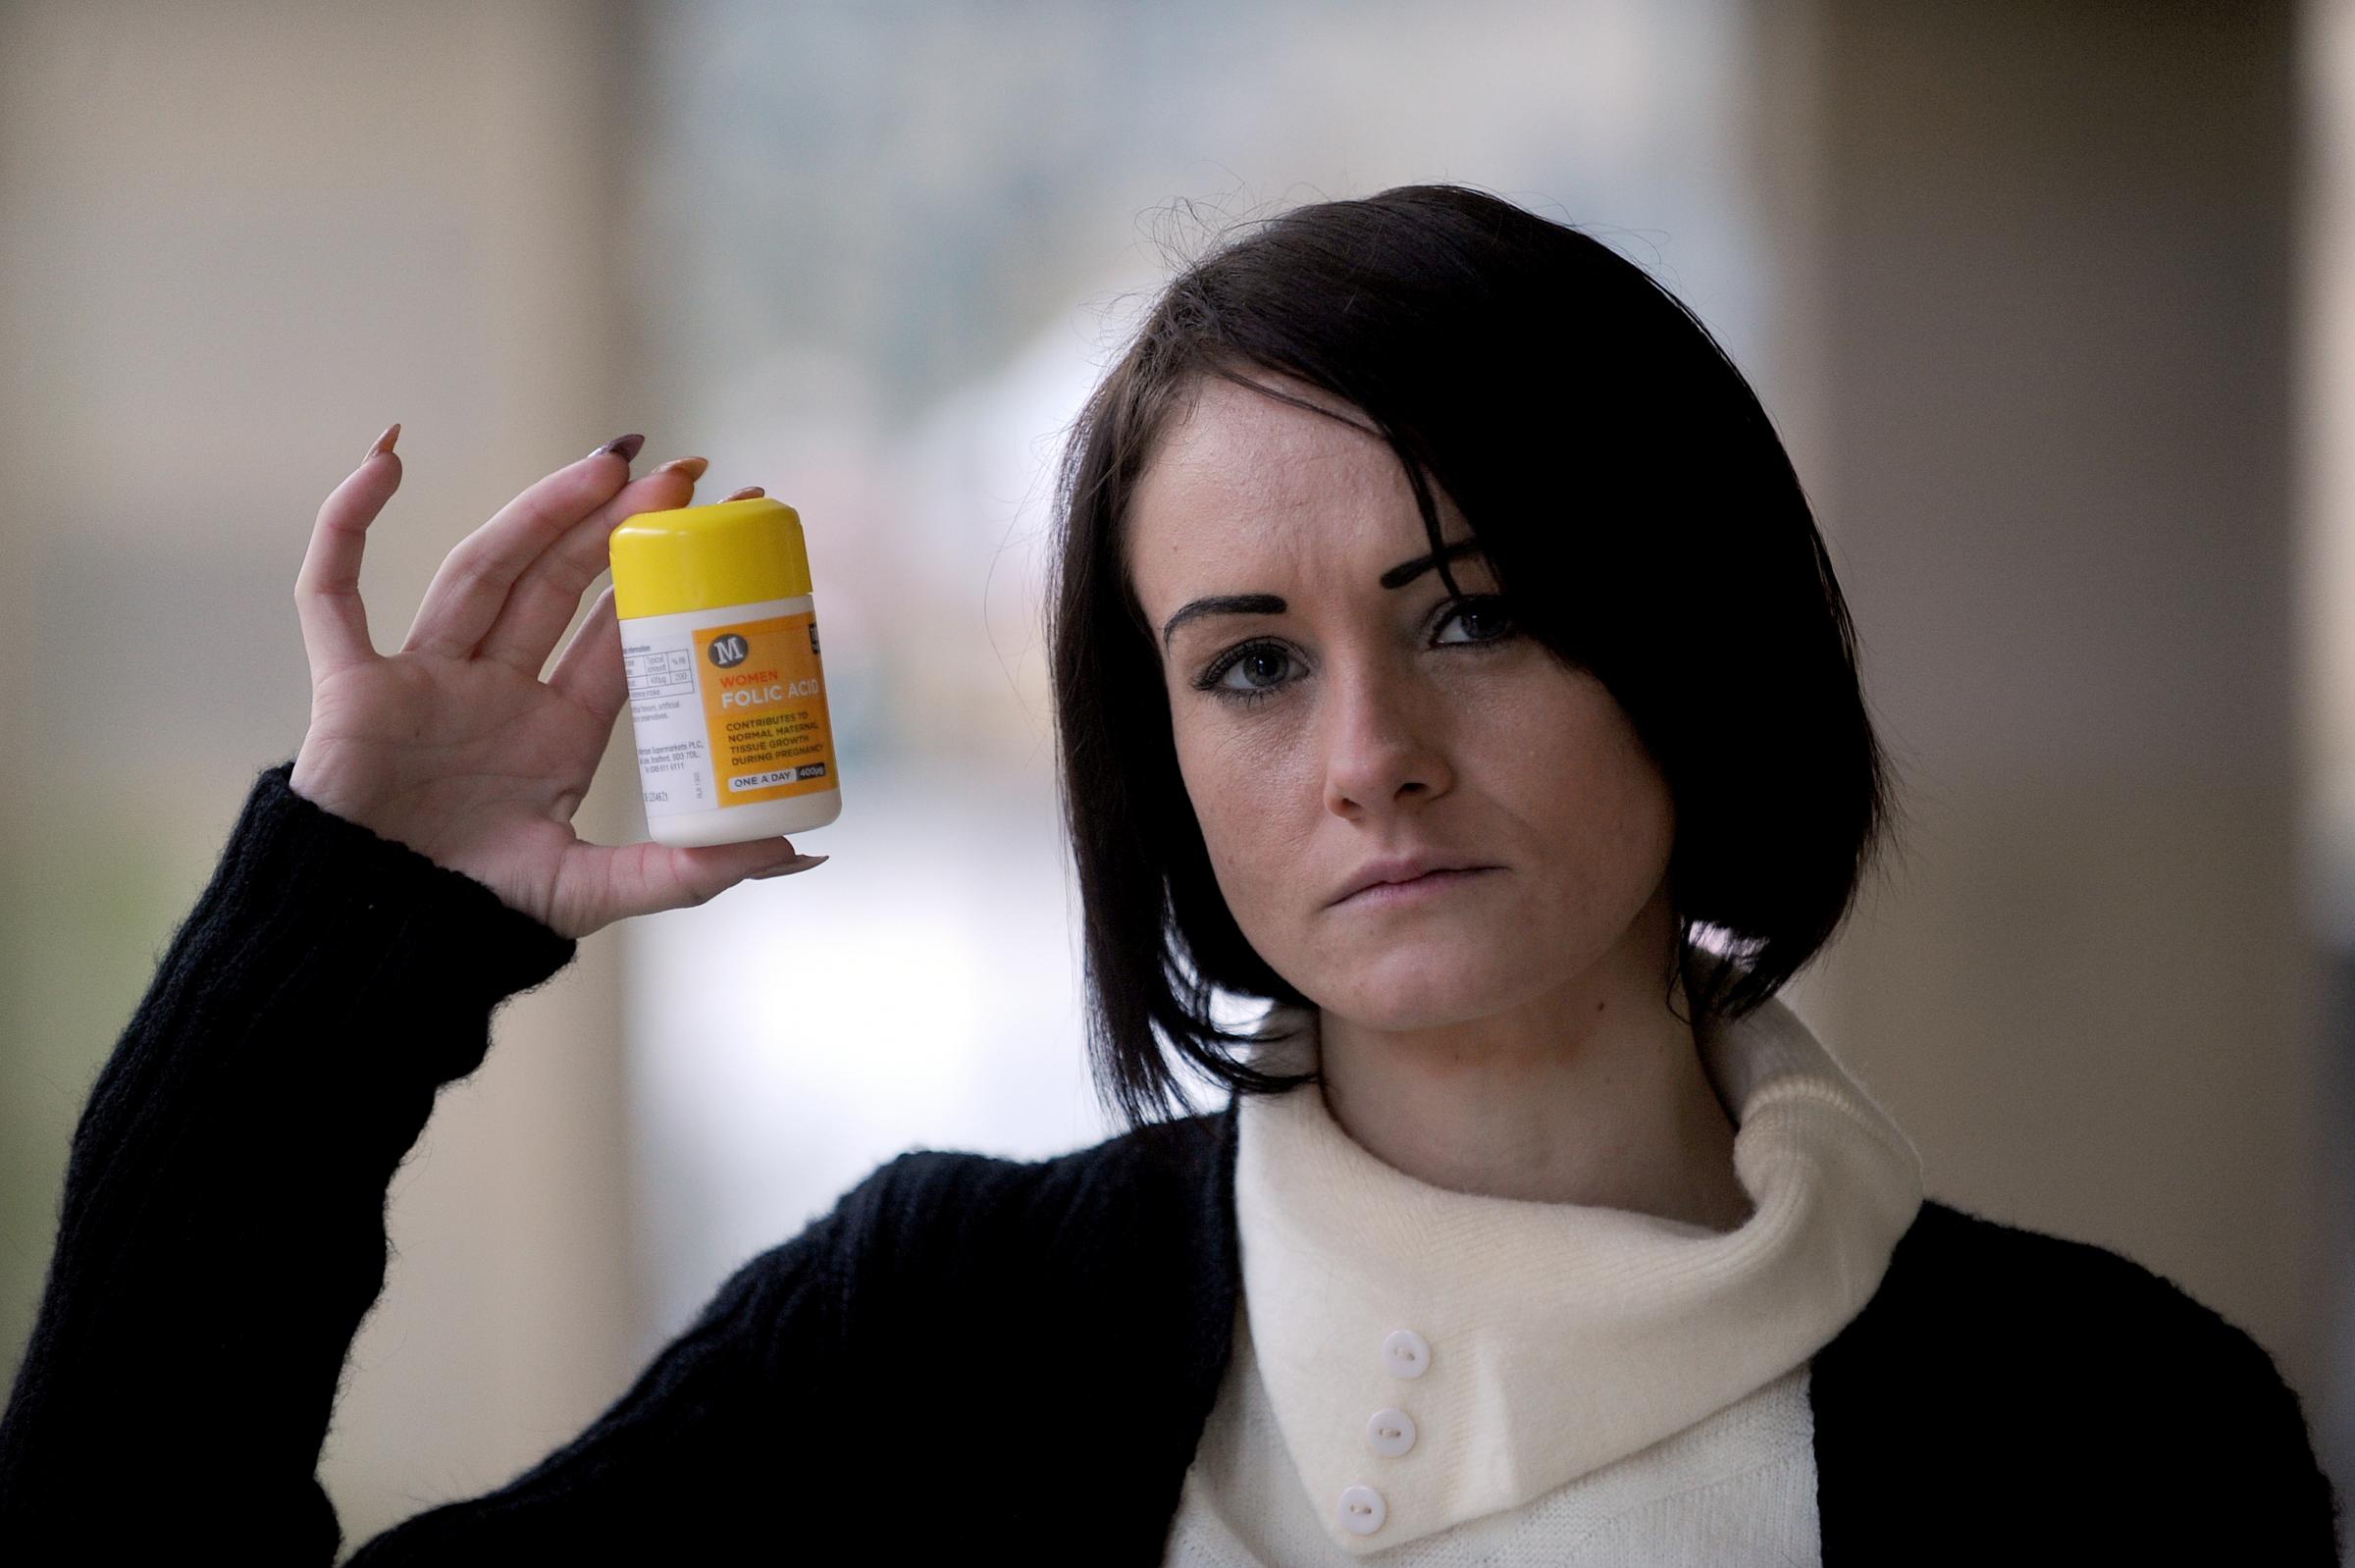 'I was sick with worry' - Supermarket sells expectant mum out-of-date supplement pills